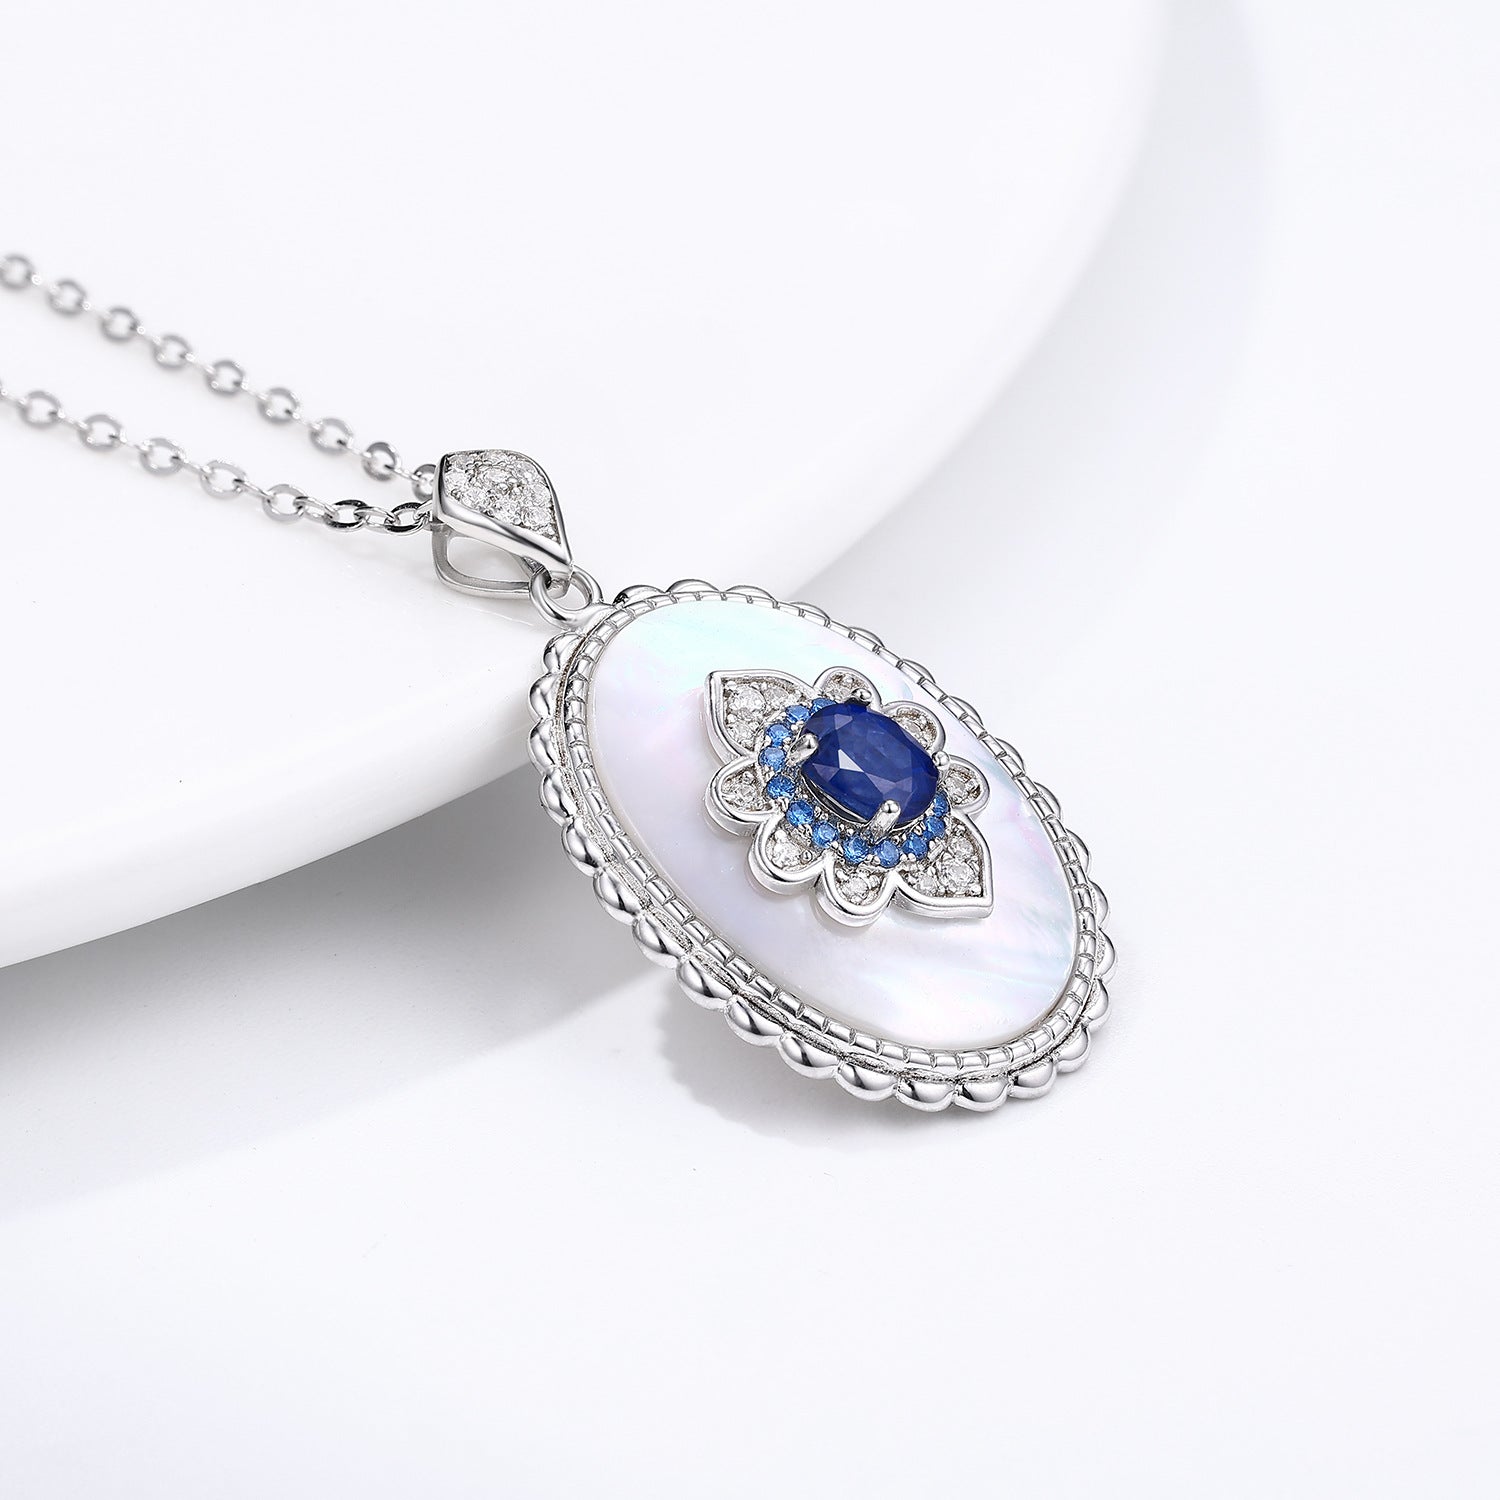 Sapphire Diamond Pendant - 925 Sterling Silver Chain Necklace for Women